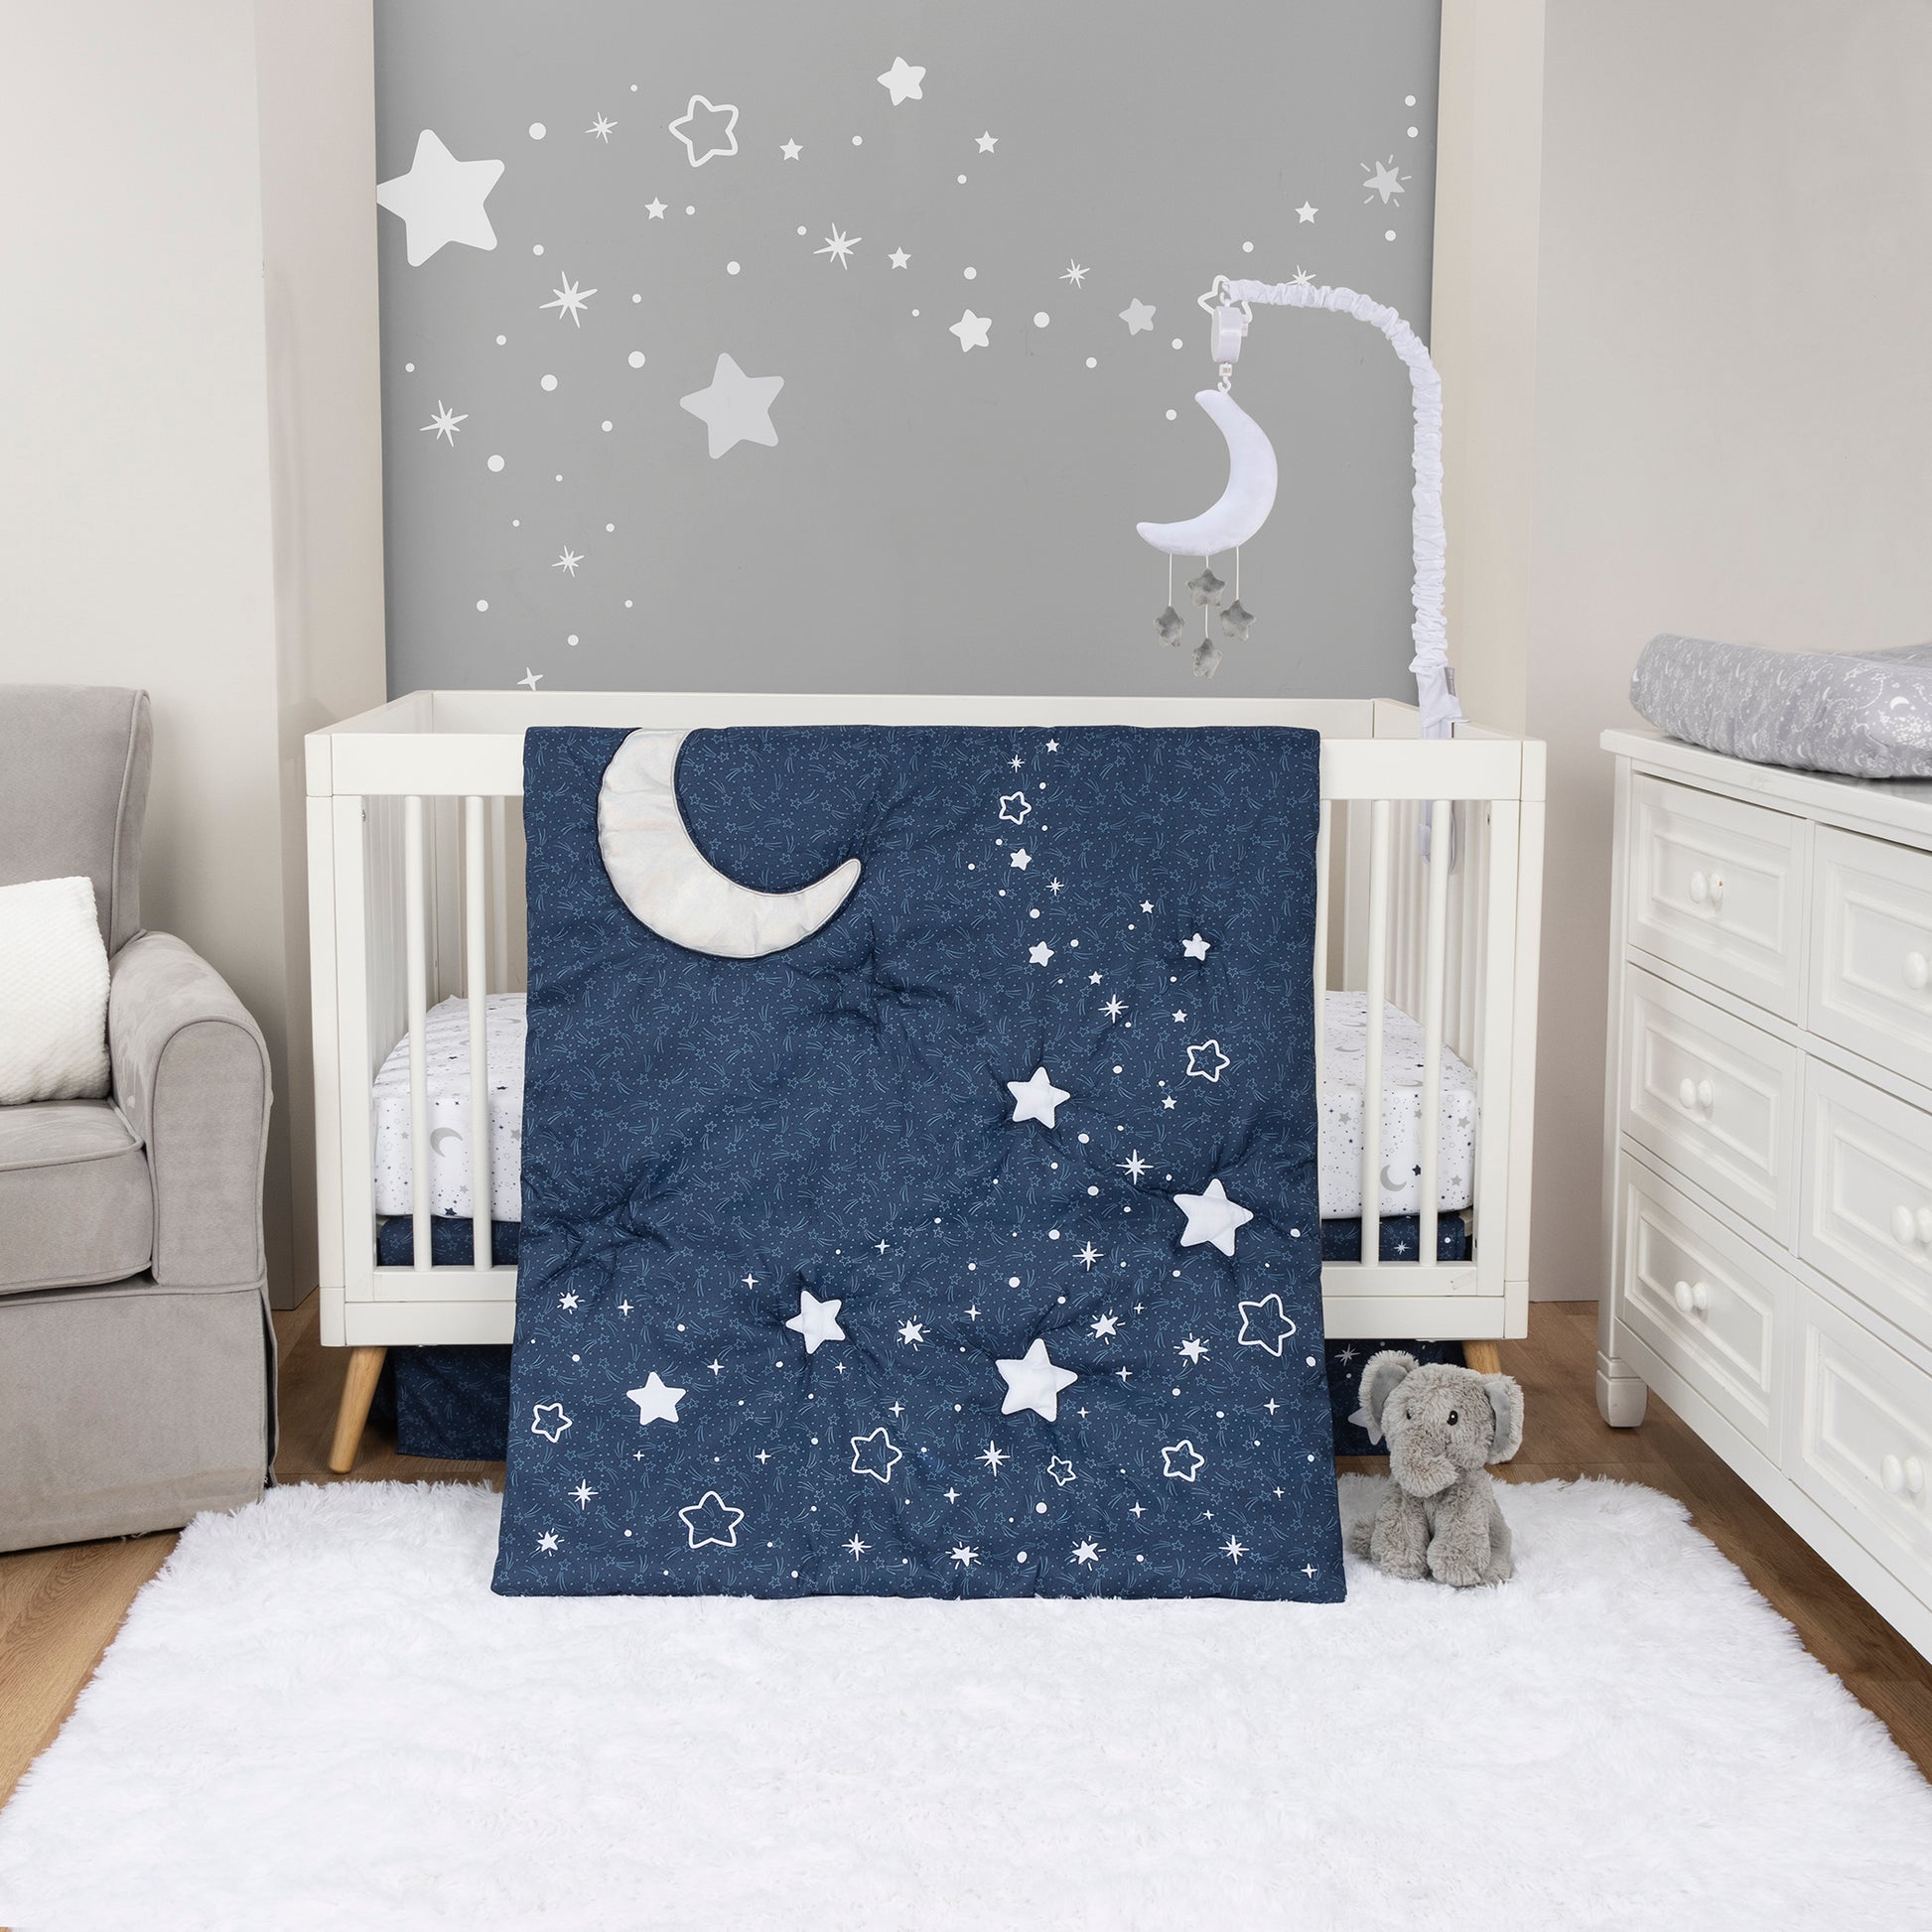 Shooting Stars 4 Piece Crib Bedding Set by Sammy & Lou® in stylized room. The wall is accented with cream pillars and a gray accent wall with scattered stars. The floor is made of a natural wooden flooring and a white rug. The nursery quilt, crib sheet and skirt, and coordinating celestial mobile (sold separtely) sit on a modern white crib with natural wooden feet. The elephant plush toy sits in front of the crib. A white dresser and gray rocking chair accents the sides of the nursery.